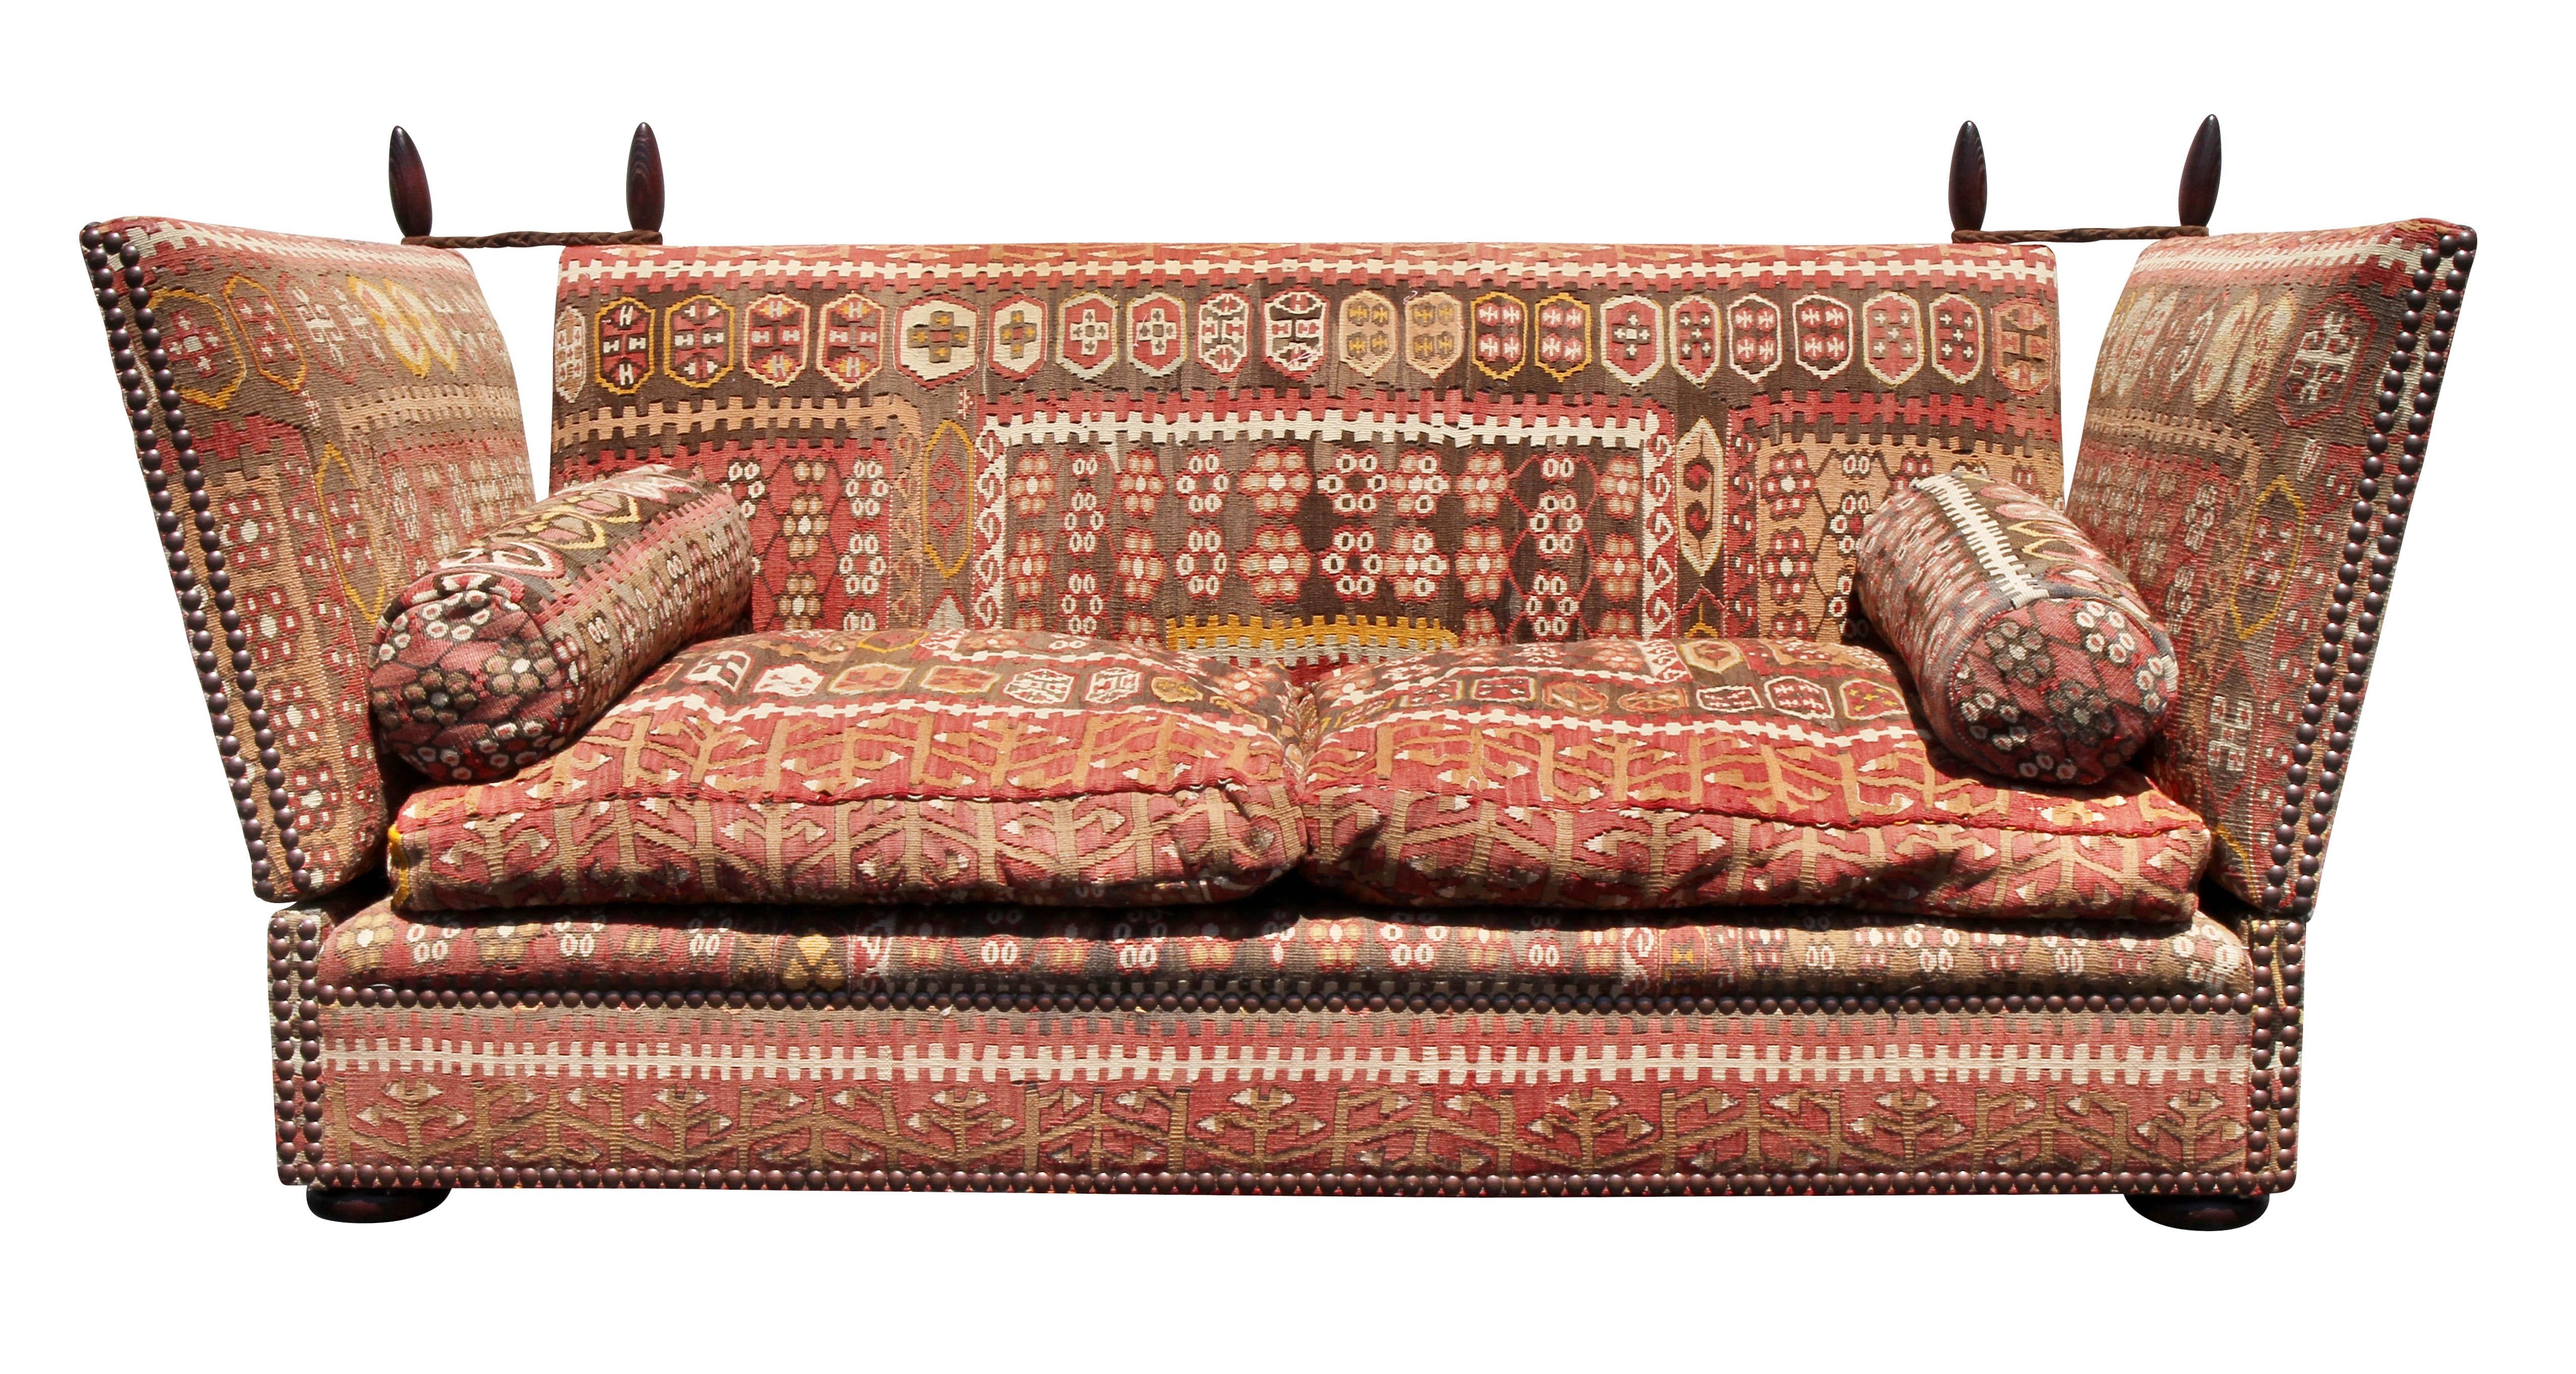 Typical form with rectangular back and adjustable fold down arms with rope and peg holders. Brass tacked overall edges. Upholstered overall front back and sides with Kilim fabric. Two loose cushion seat down filled cushions. Includes two bolster